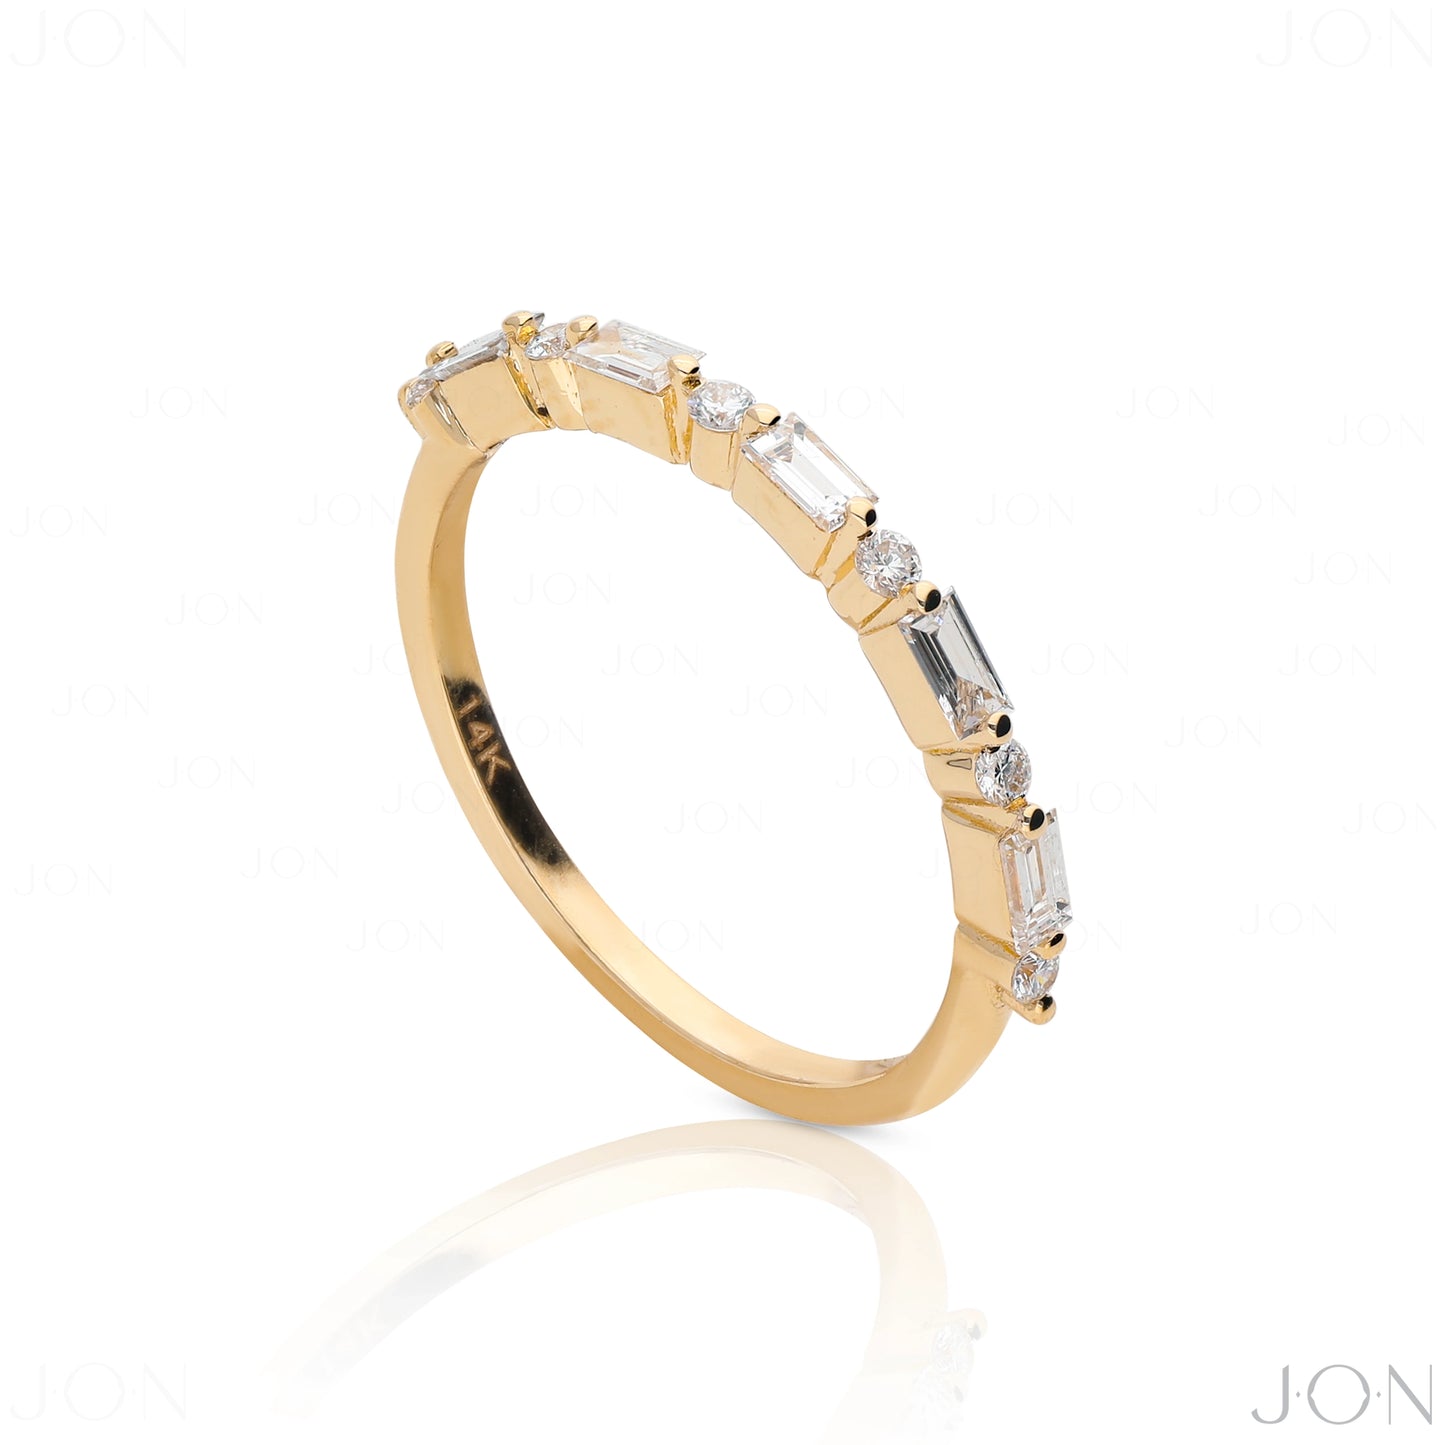 14K Gold 0.30 Ct. Diamond Baguette VS Clarity F Color Band Ring Gfit For Her